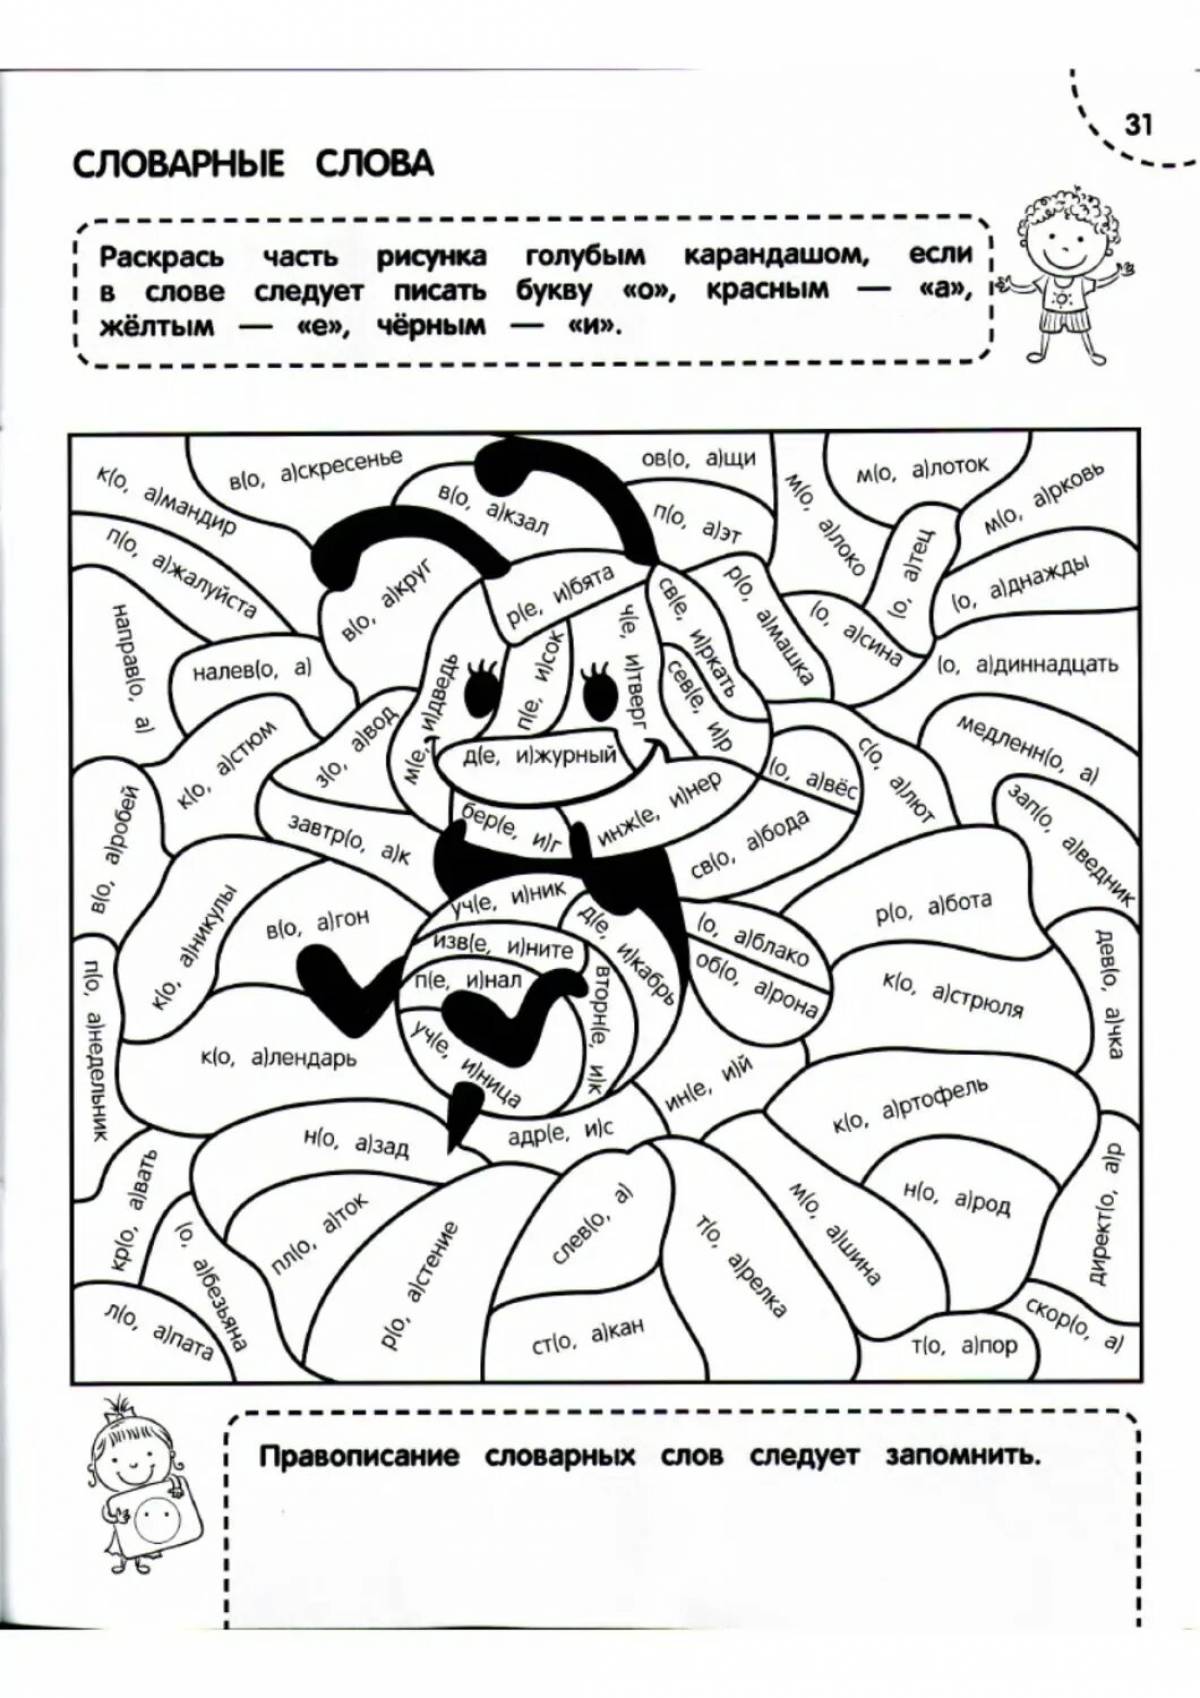 Exciting 2nd grade Russian coloring book